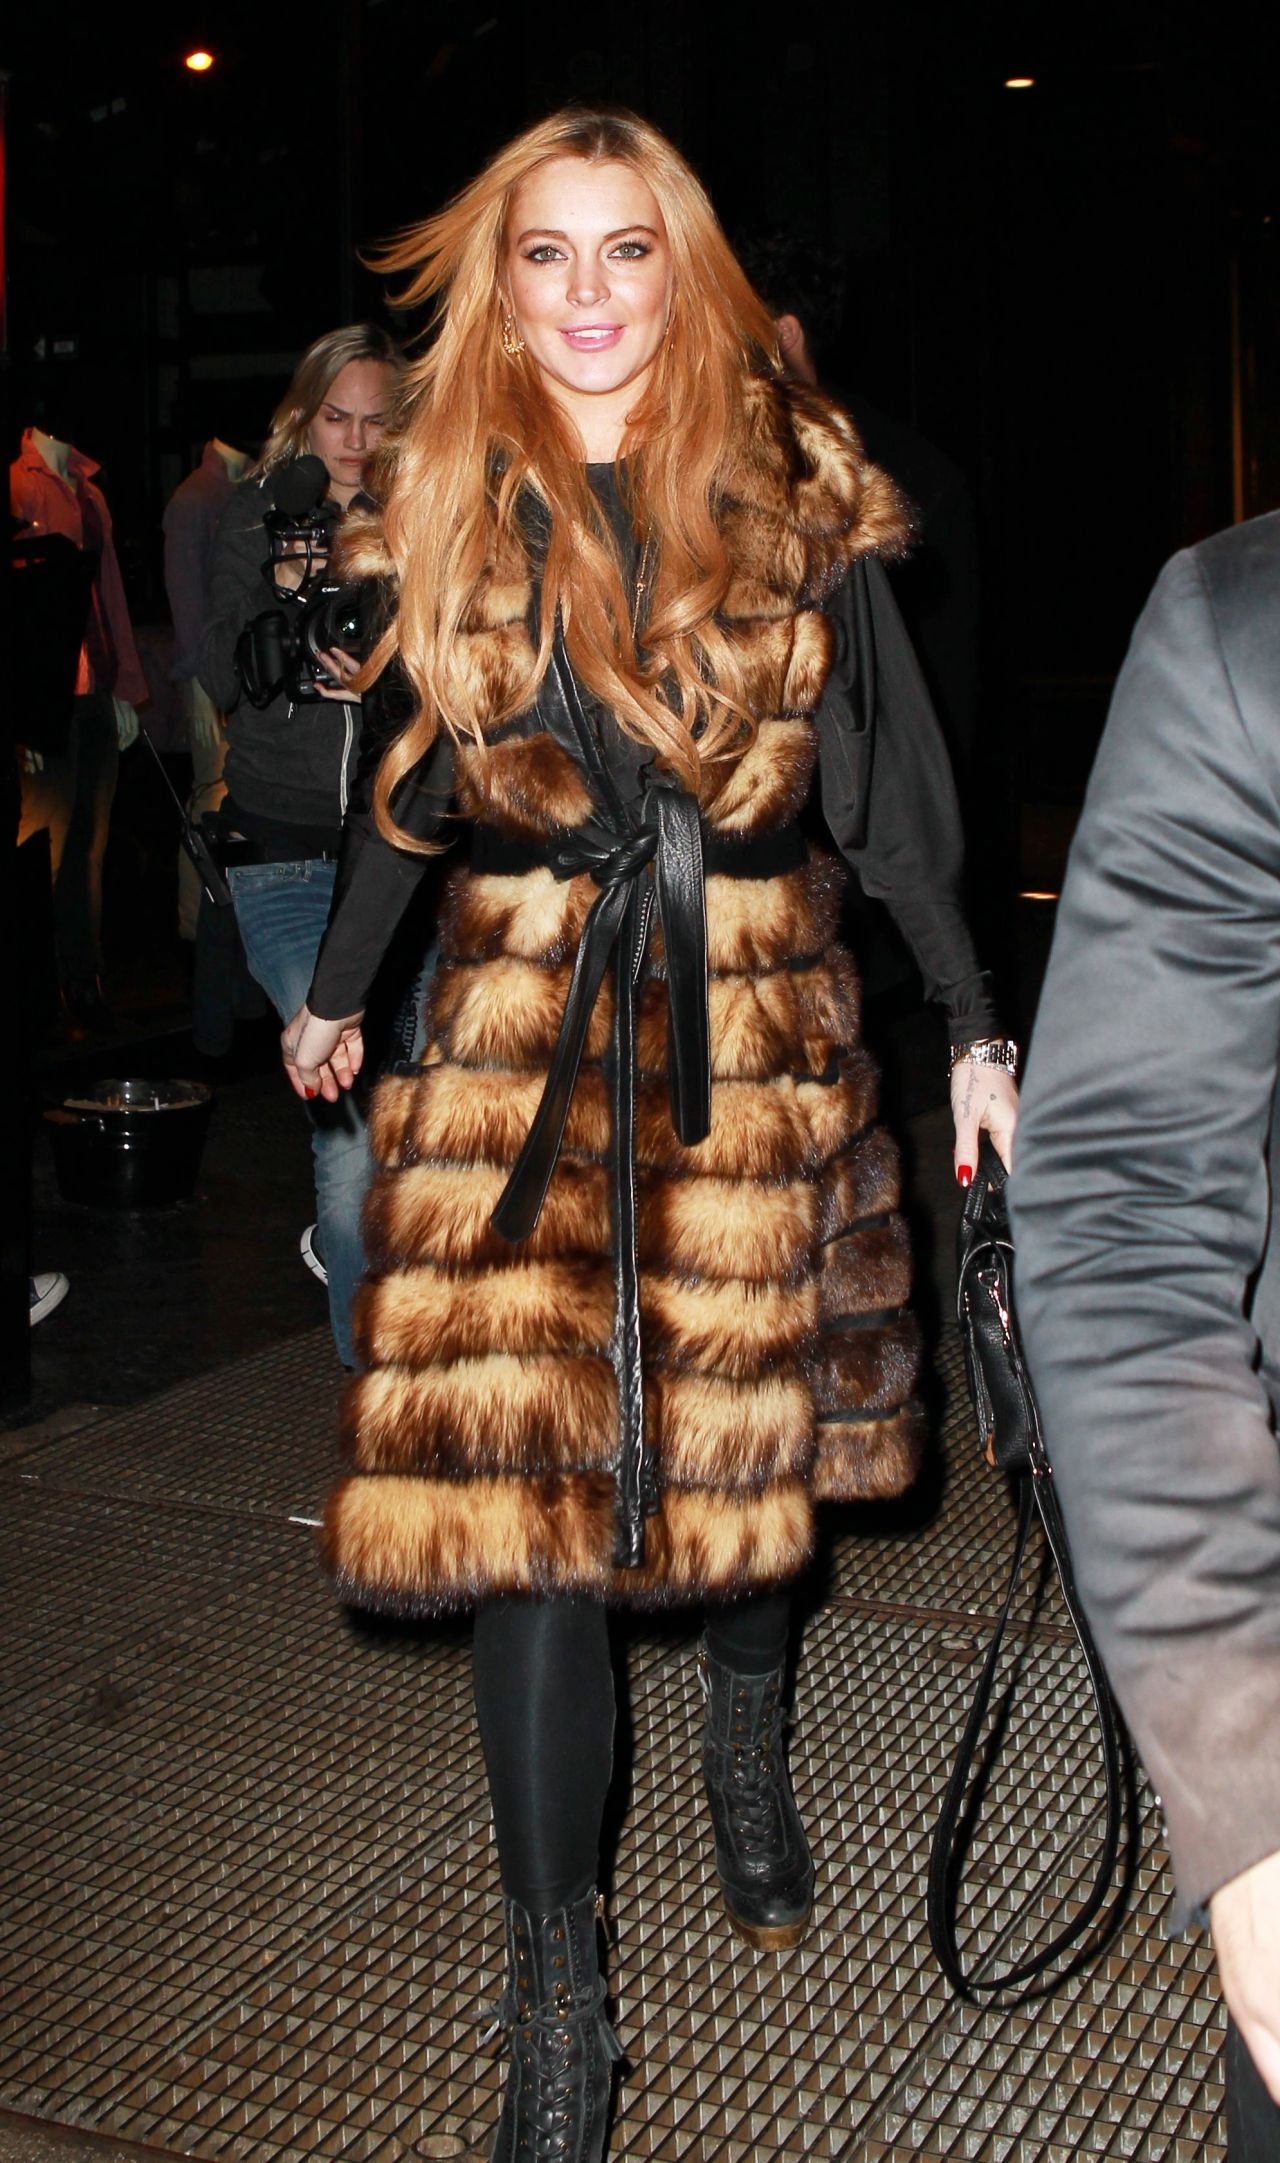 Lindsay Lohan stays warm while in New York on December 16.